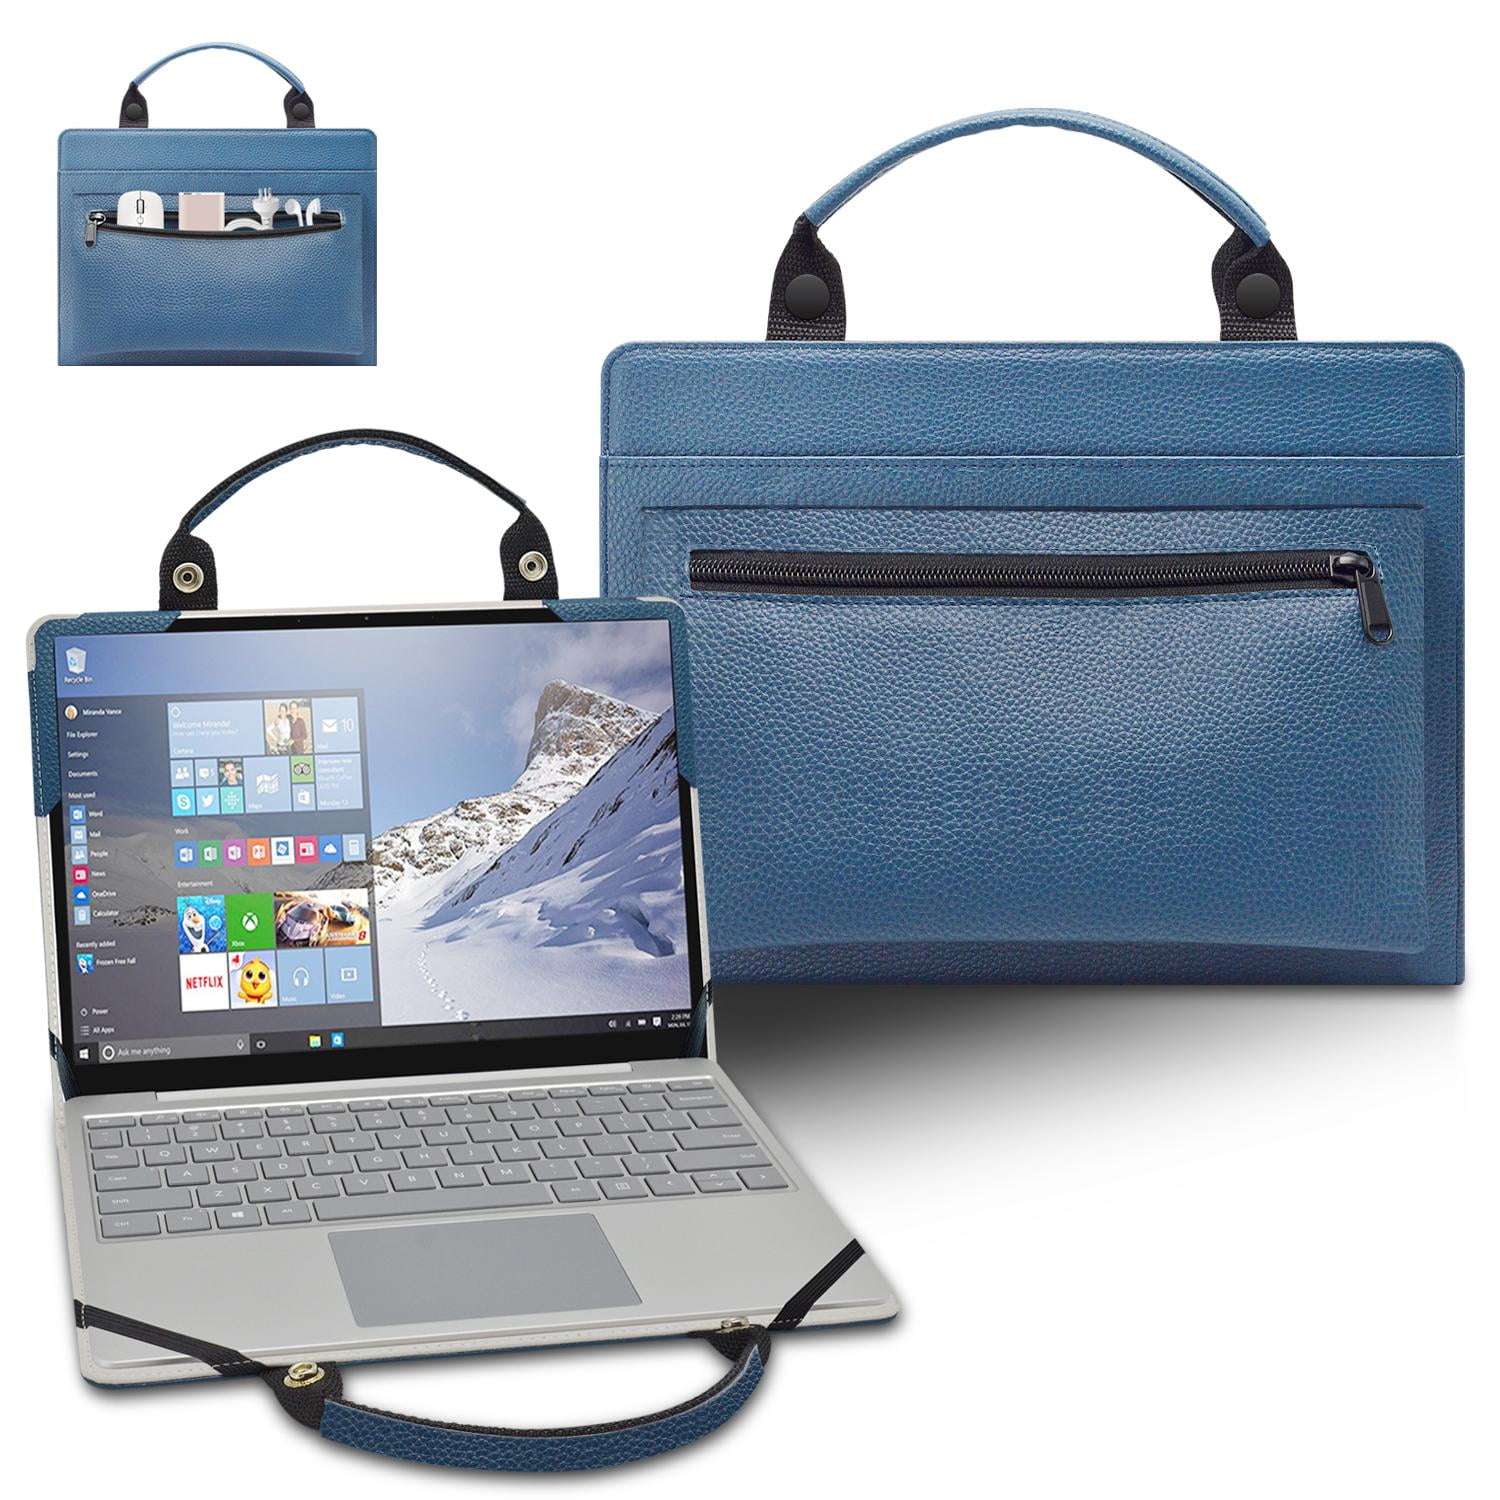 Cover Case Compatible with Lenovo Ideapad 330 320 15.6 inch Laptop Bags PC Sleeve Stand Business Protective Skin Shell